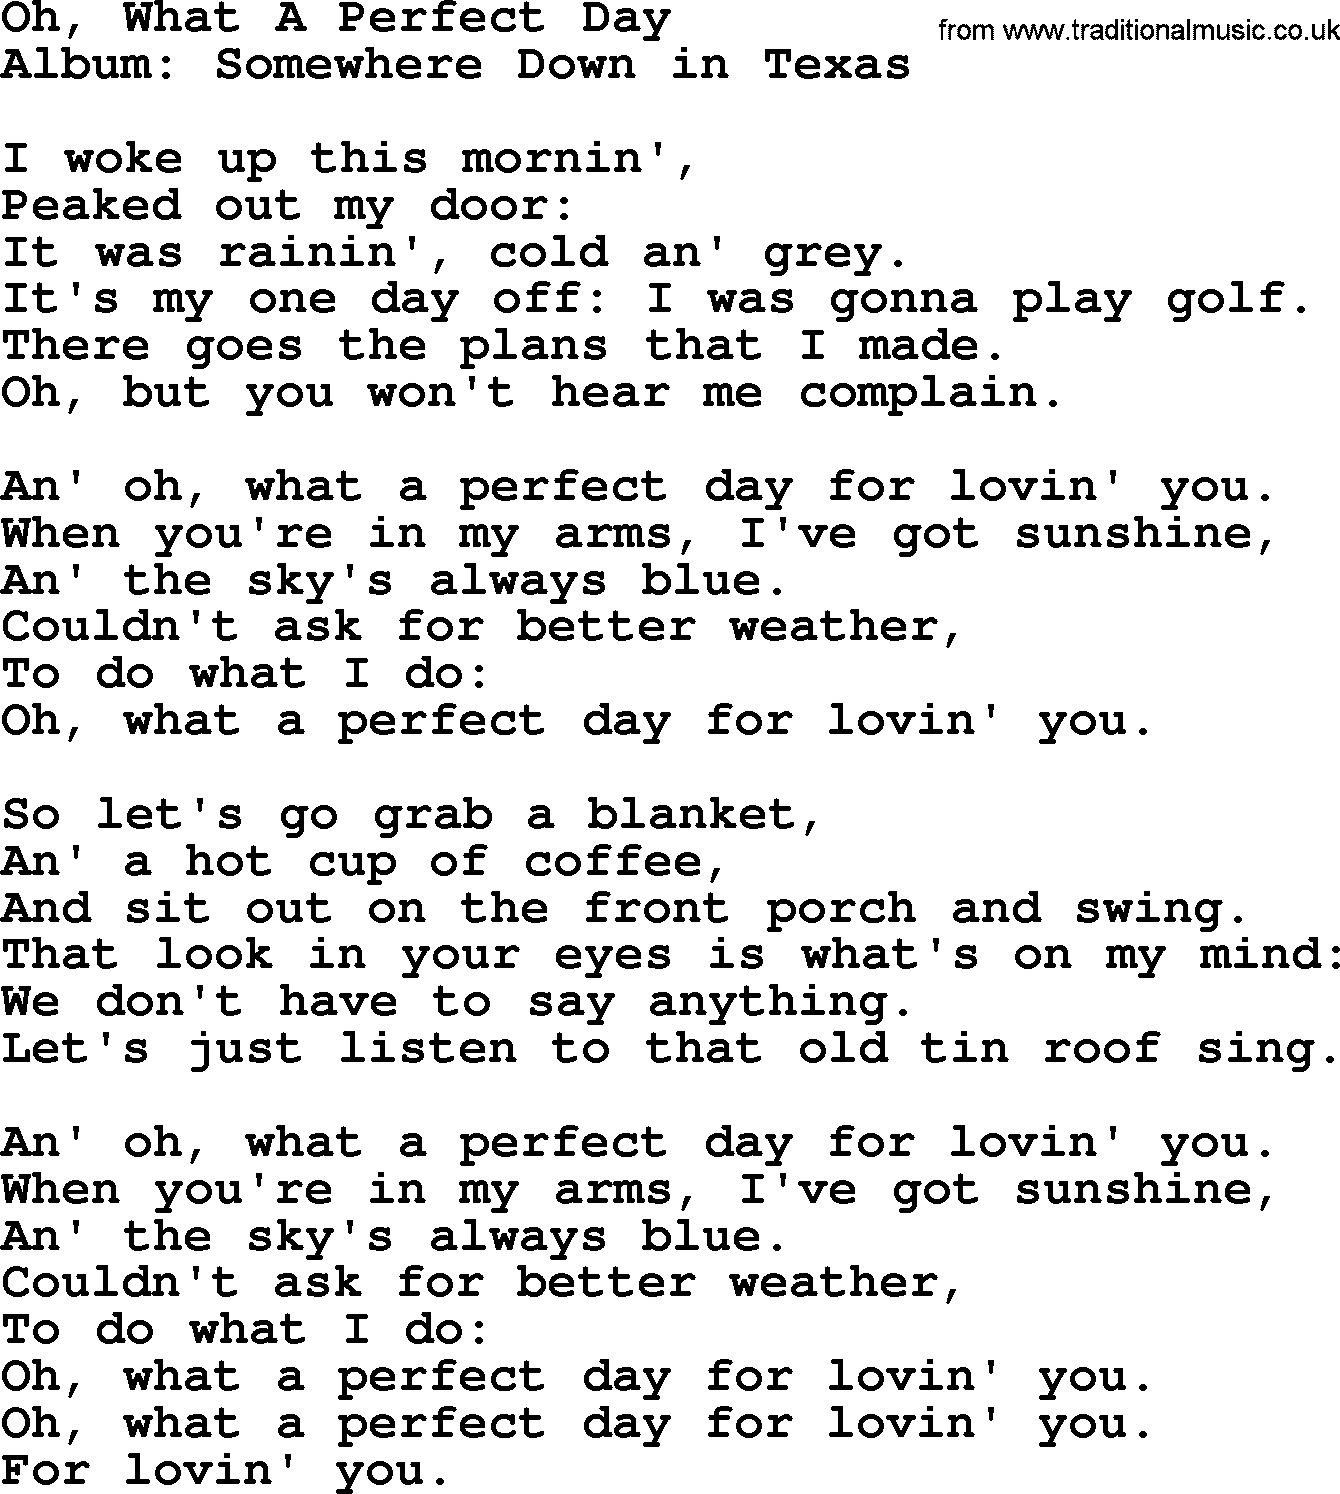 George Strait song: Oh, What A Perfect Day, lyrics